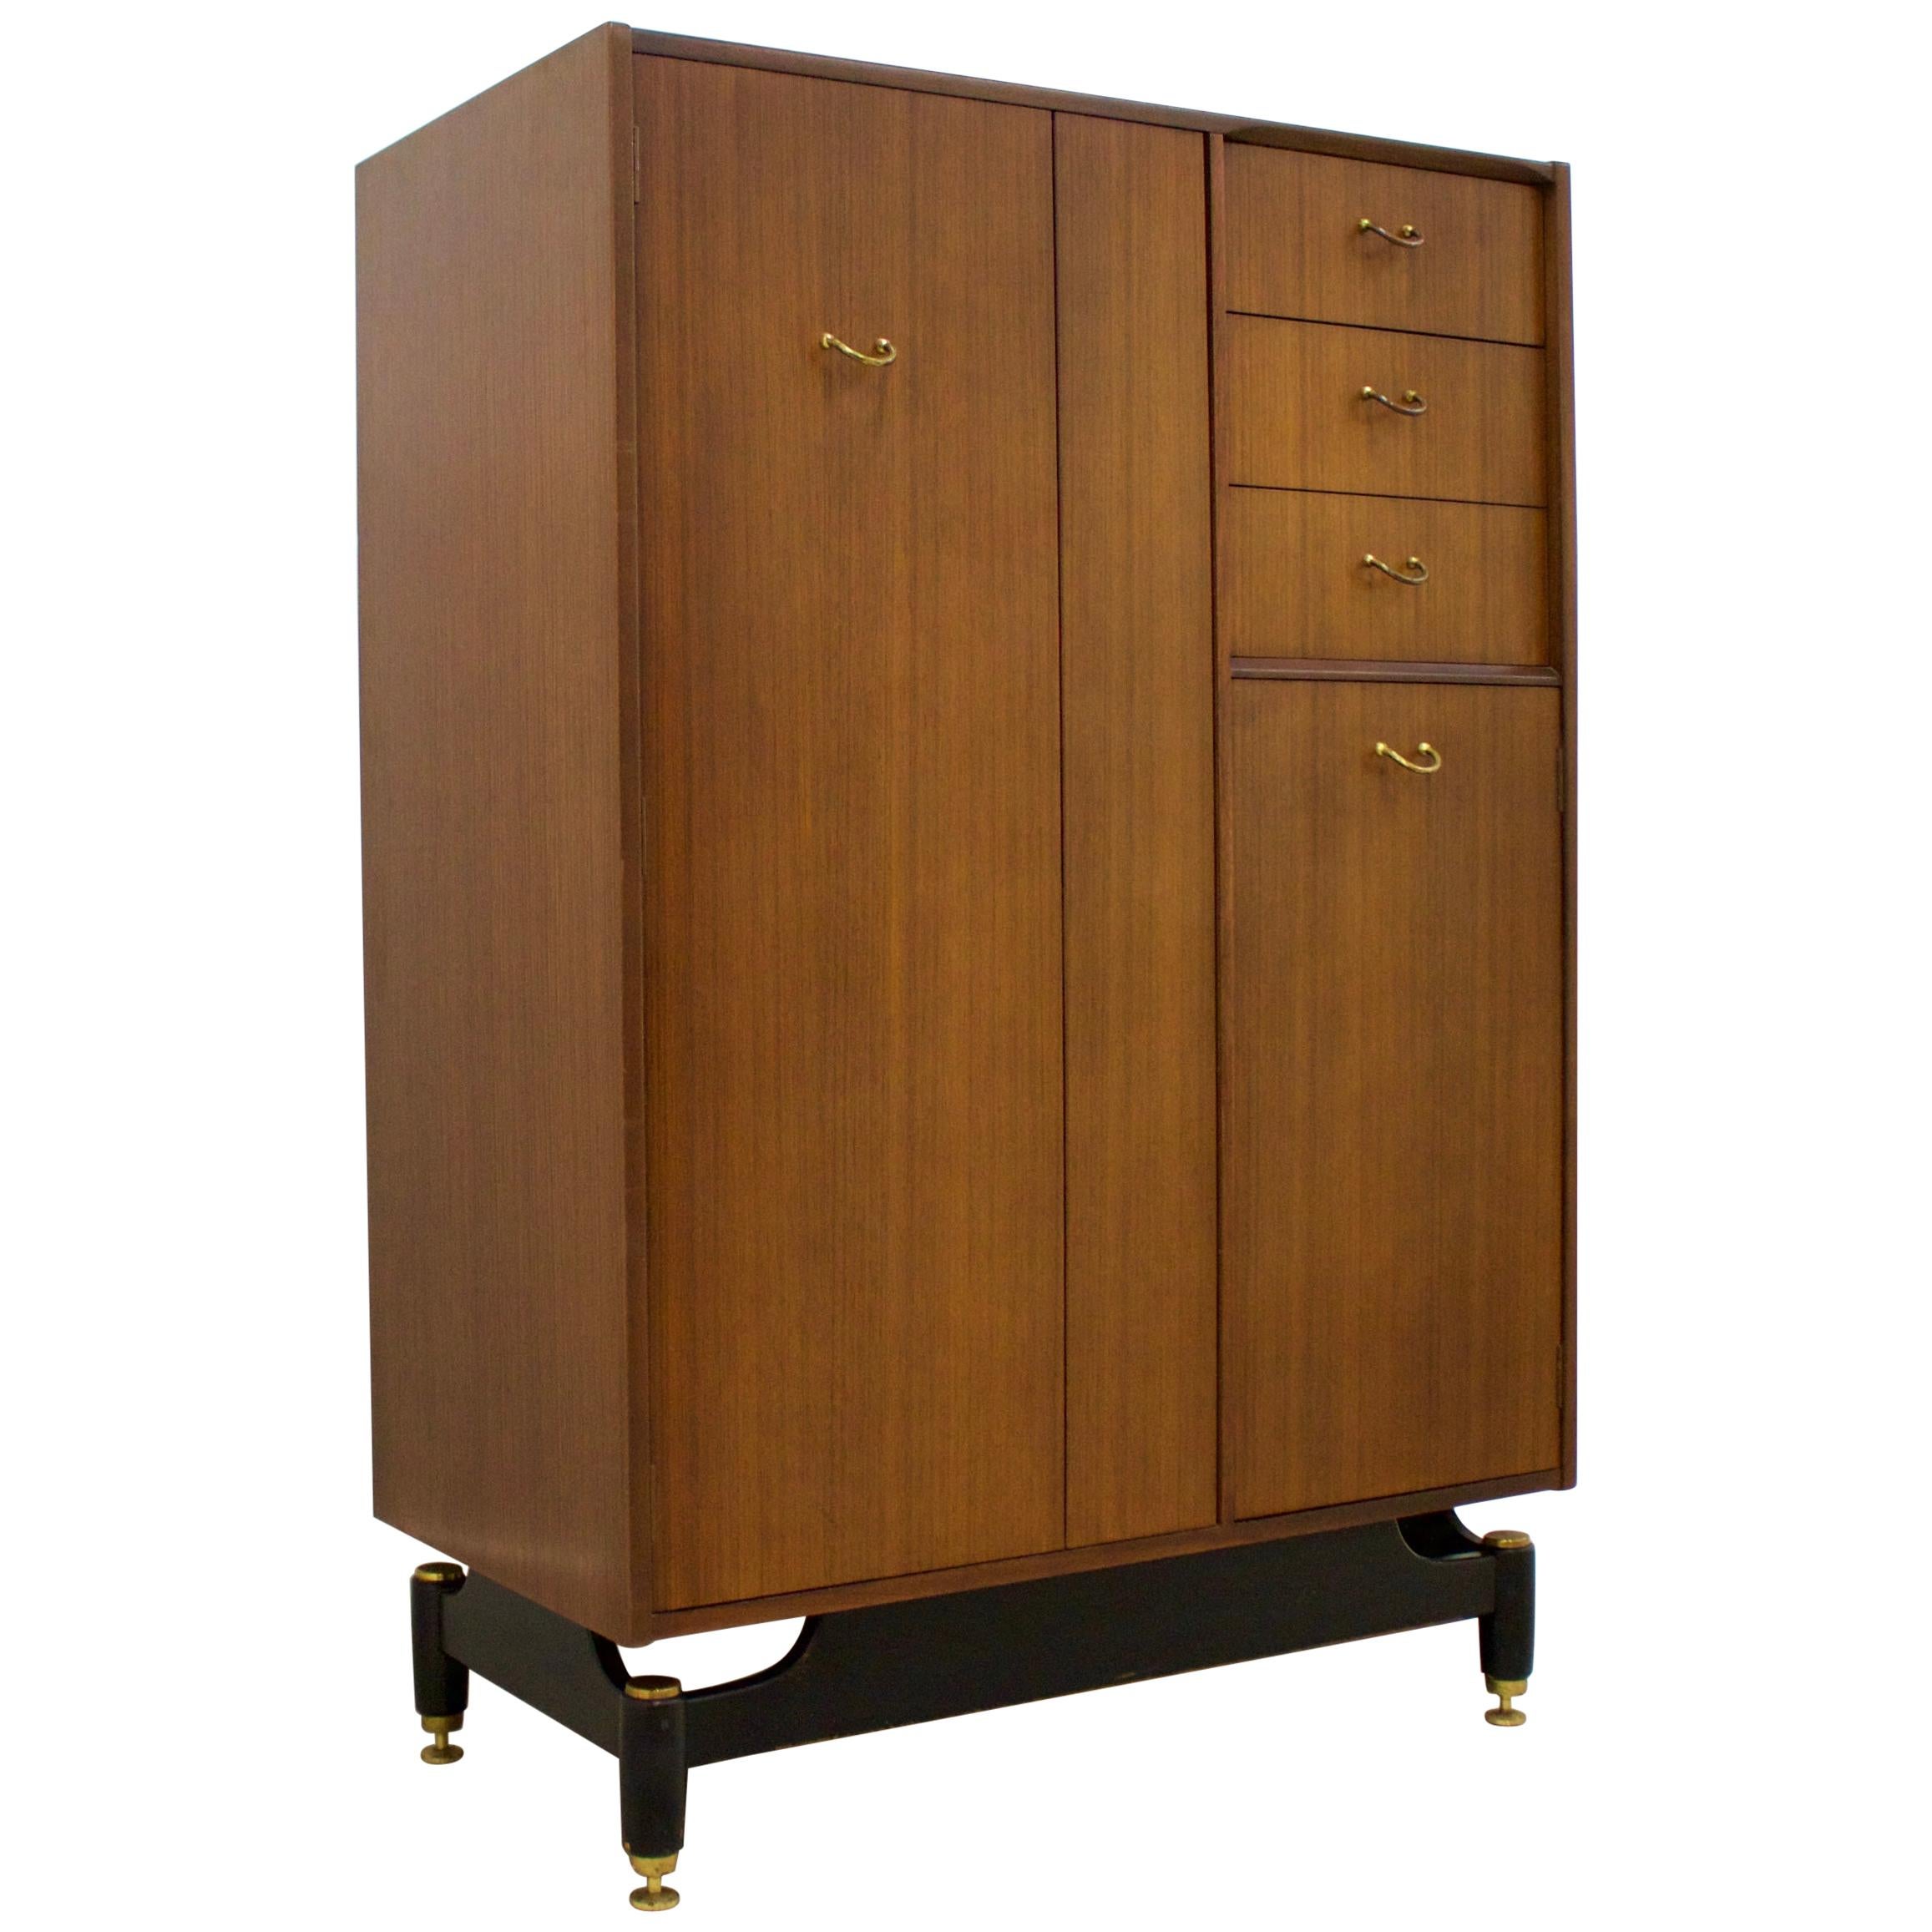 Midcentury Compact Tallboy Wardrobe from G-Plan, 1960s